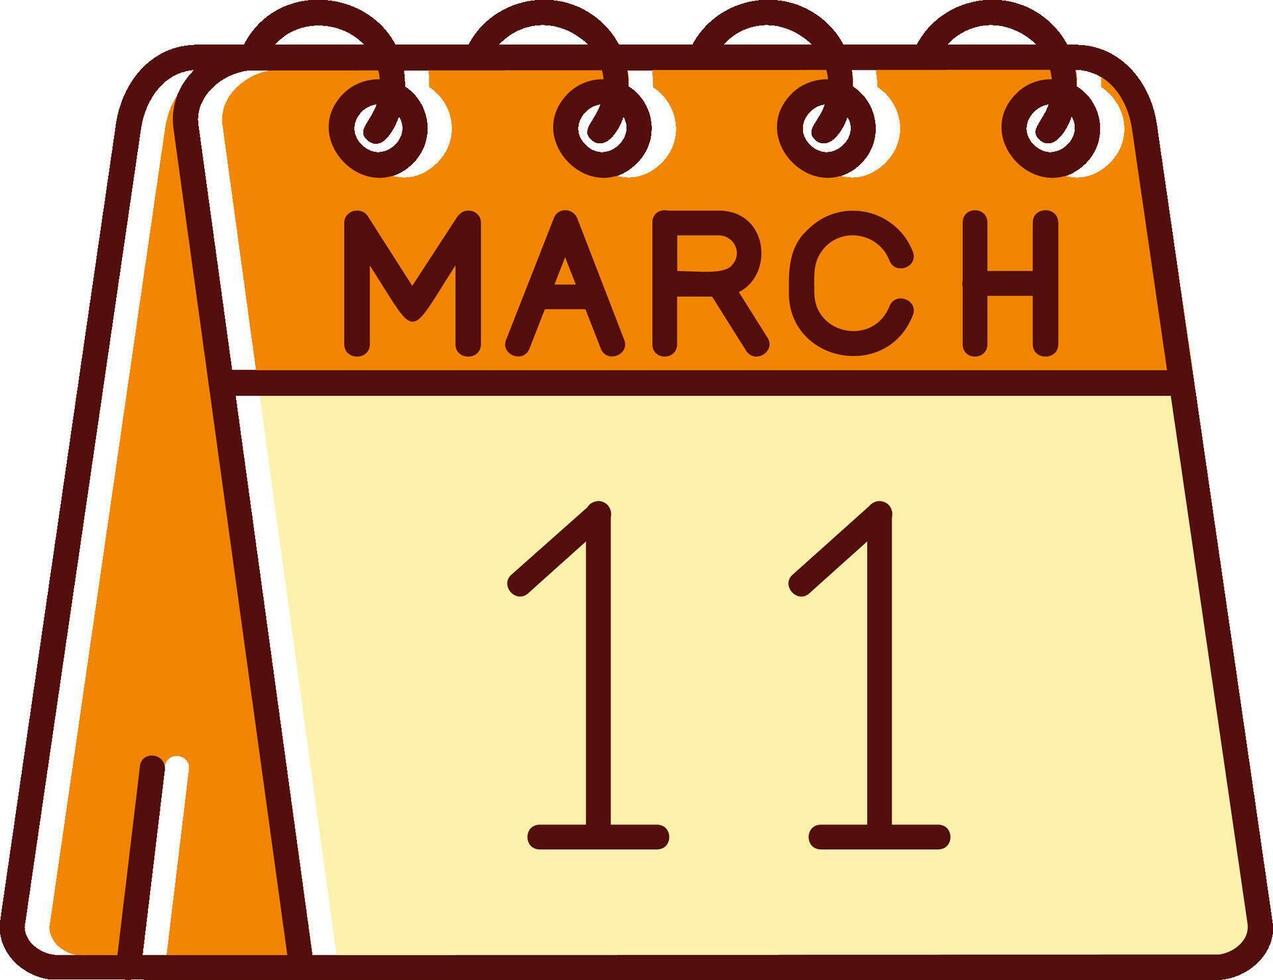 11th of March filled Sliped Retro Icon vector